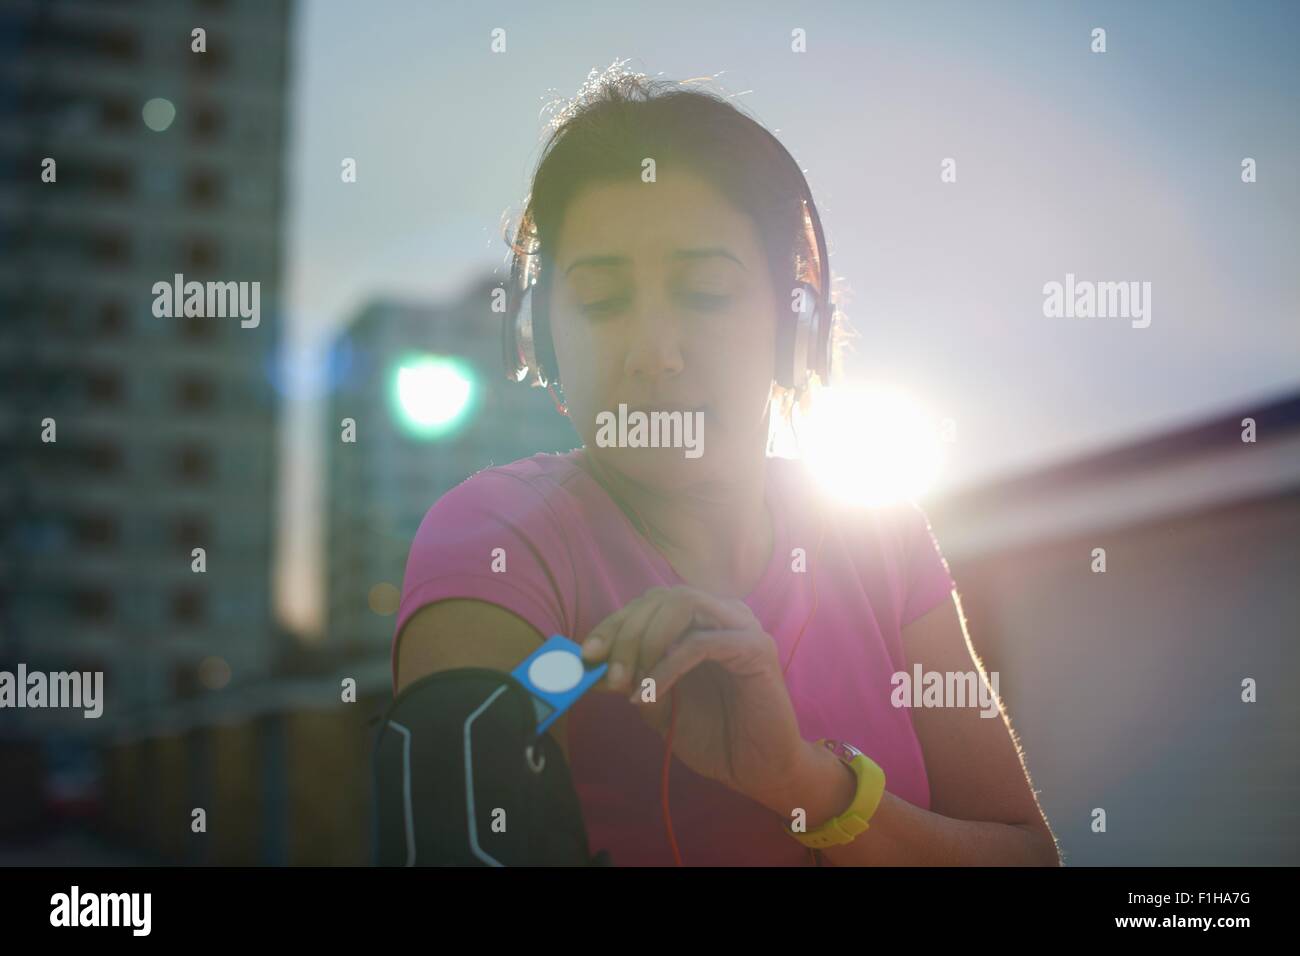 Mature female runner removing MP3 player from armband at dusk Stock Photo